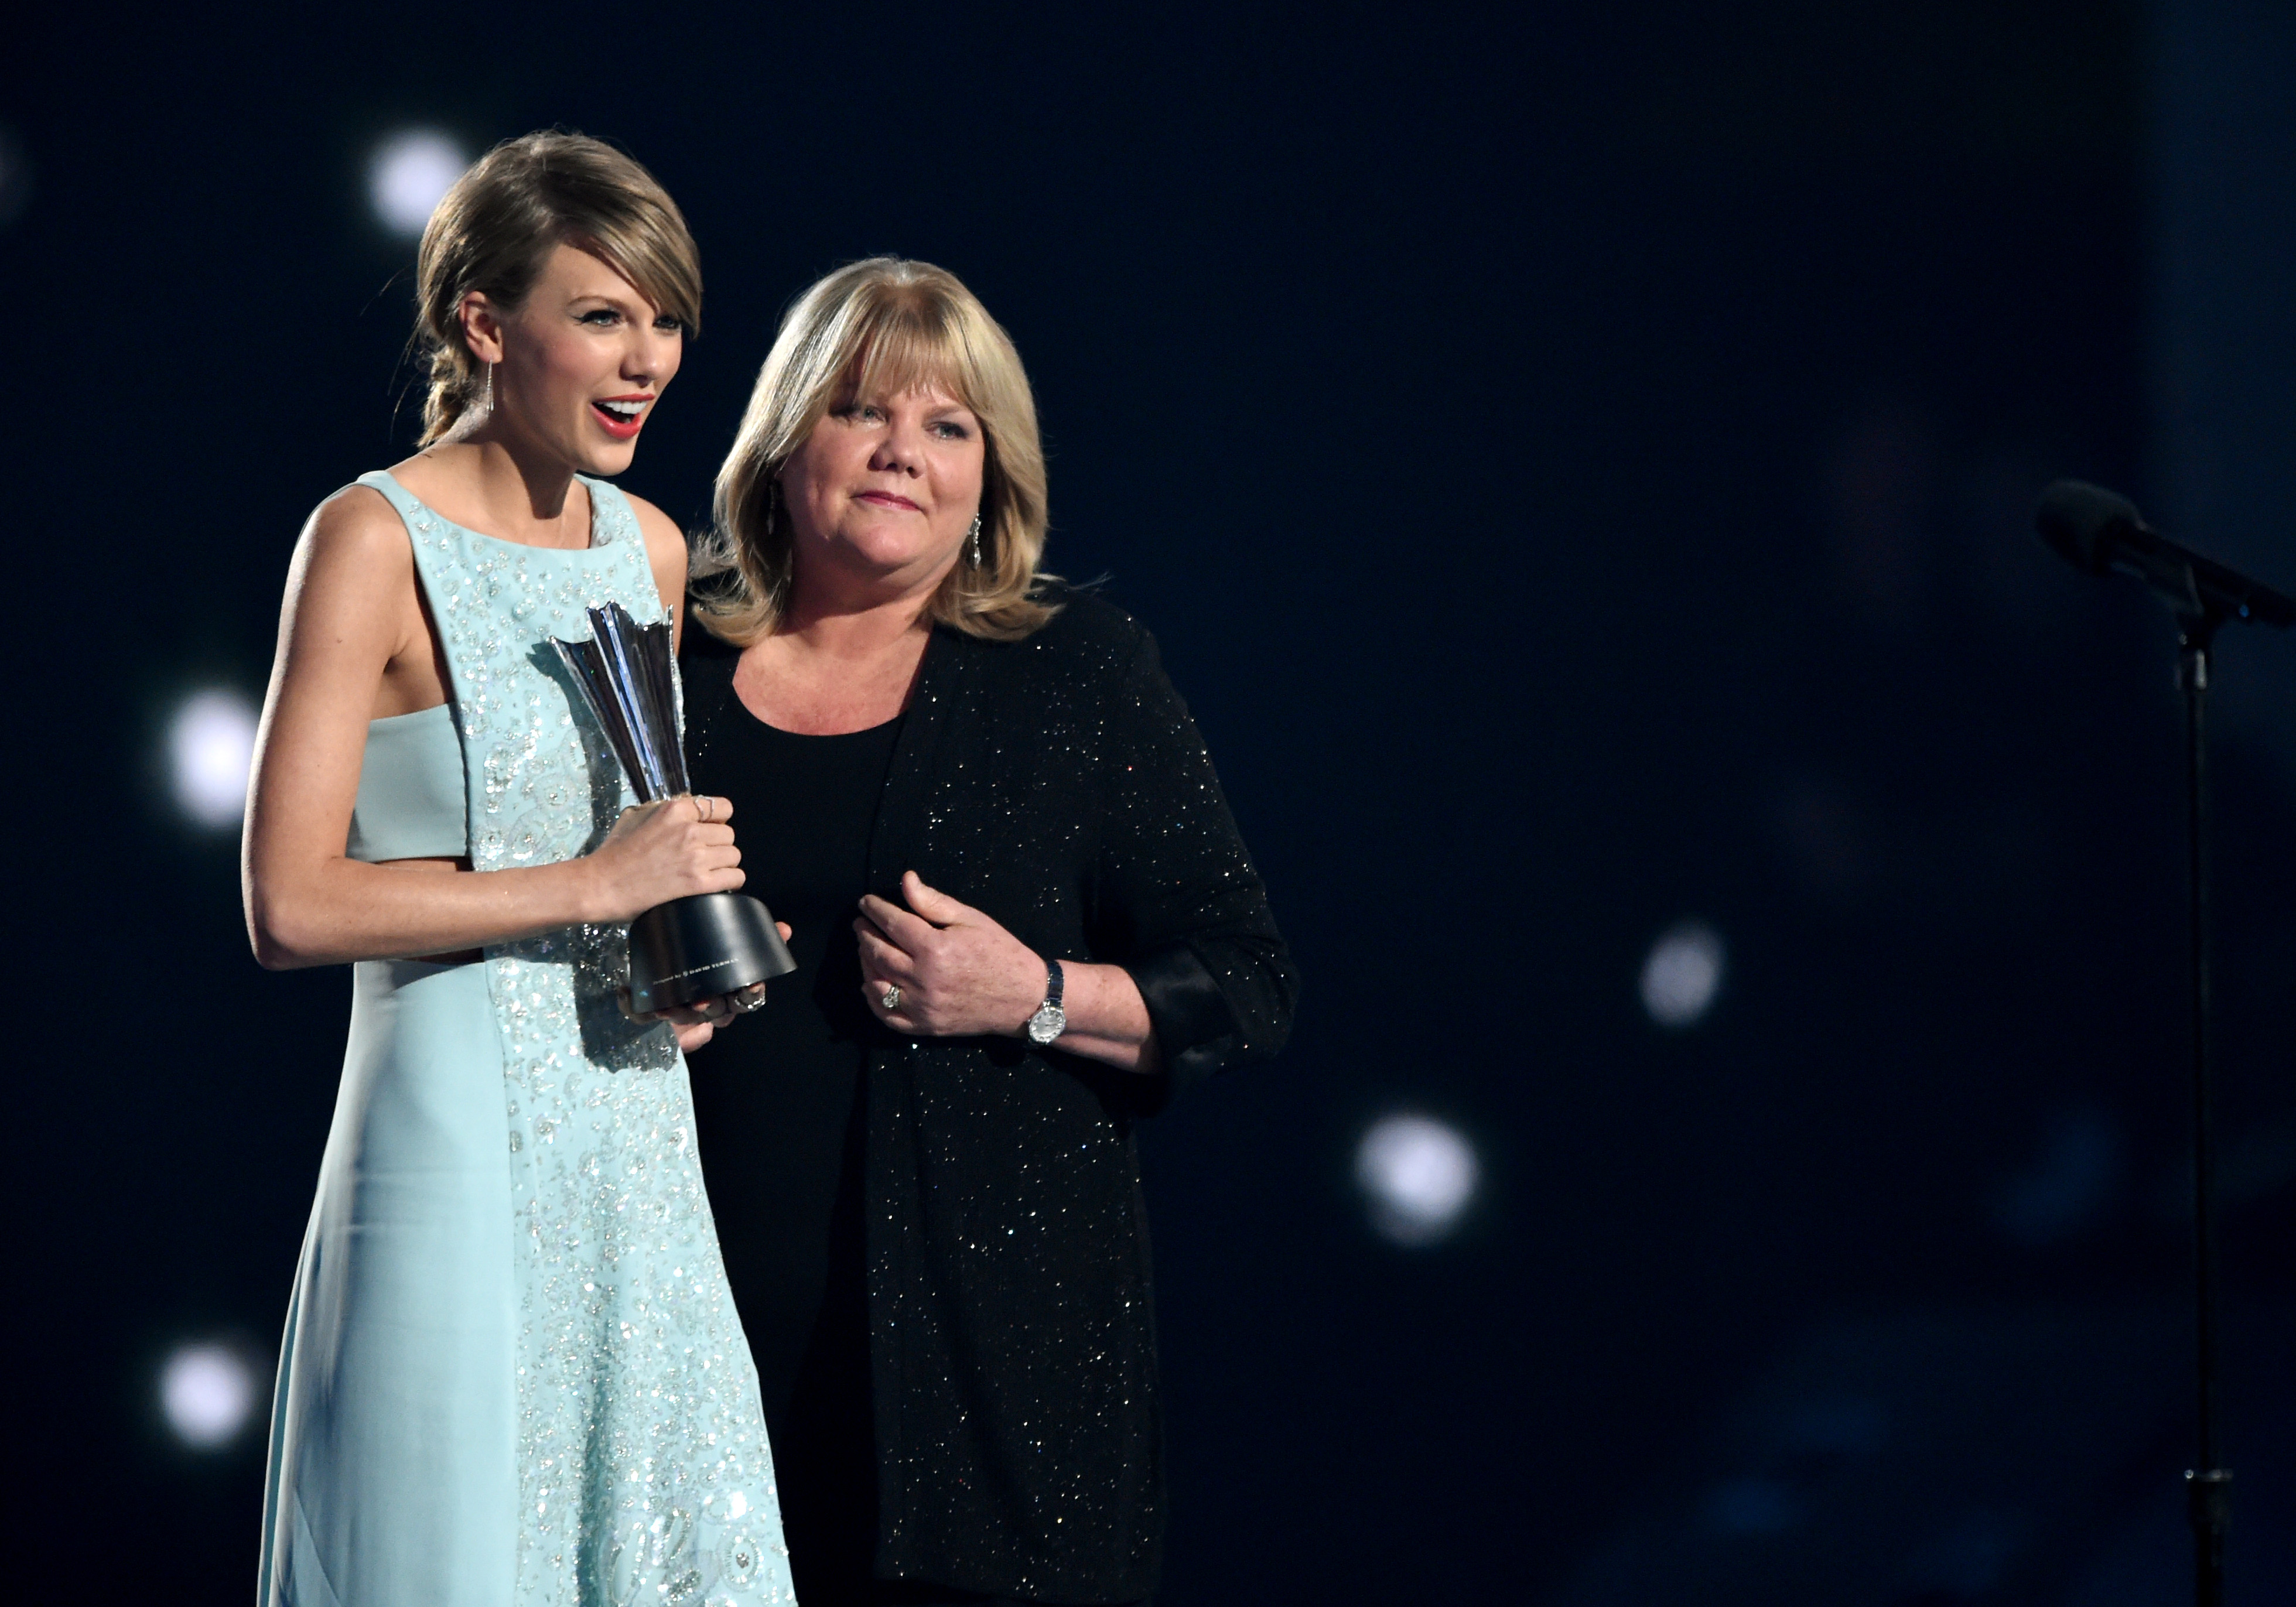 Honoree Taylor Swift accepts the Milestone Award from Andrea Swift onstage during the 50th Academy Of Country Music Awards at AT&amp;T Stadium on April 19, 2015 in Arlington, Texas. (Cooper Neill—Getty Images)